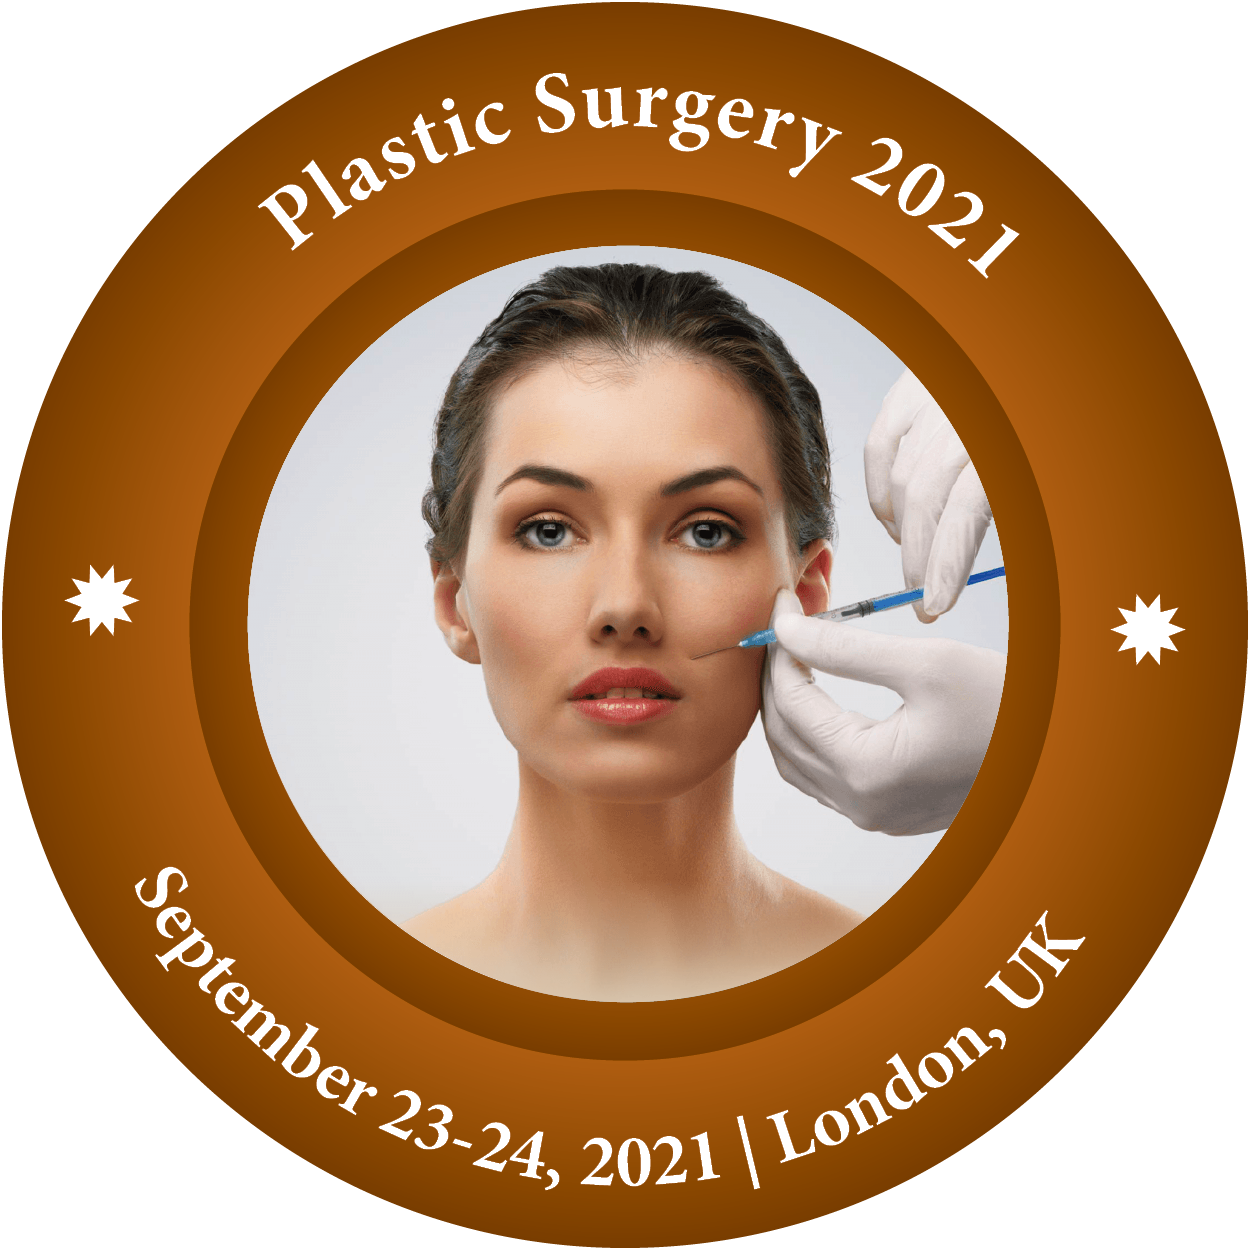 6th International conference on Plastic and Reconstructive Surgery 2021